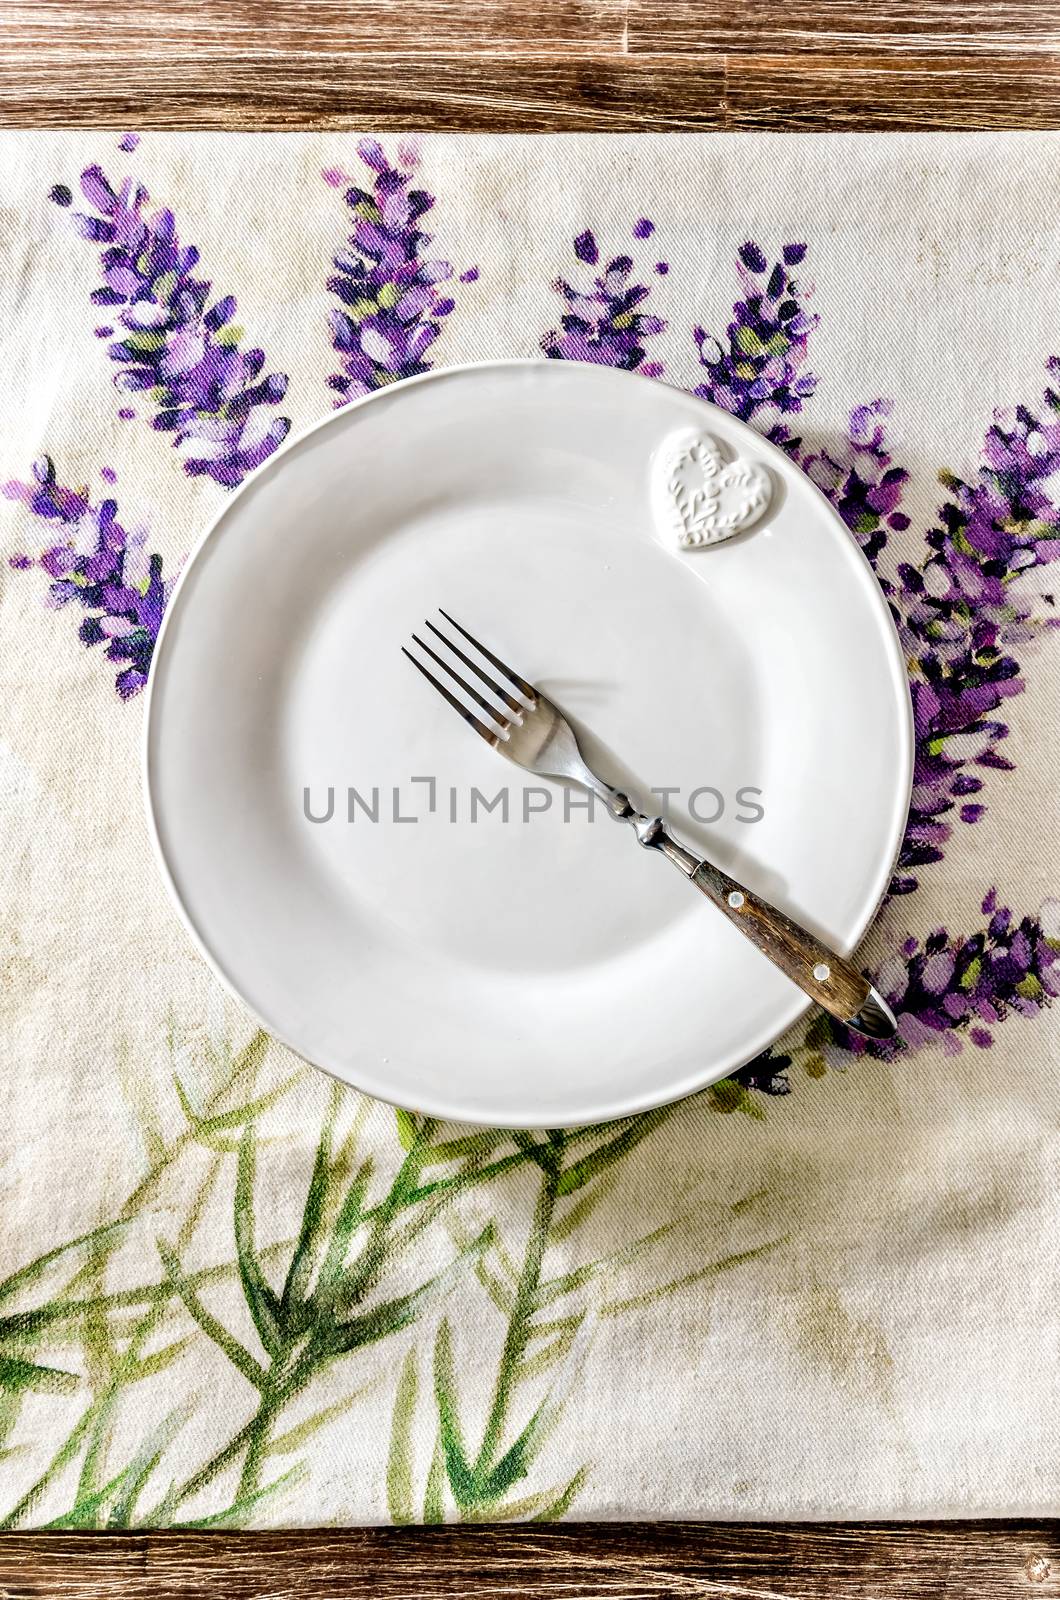 Plate and fork on vintage wooden dining table by martinm303